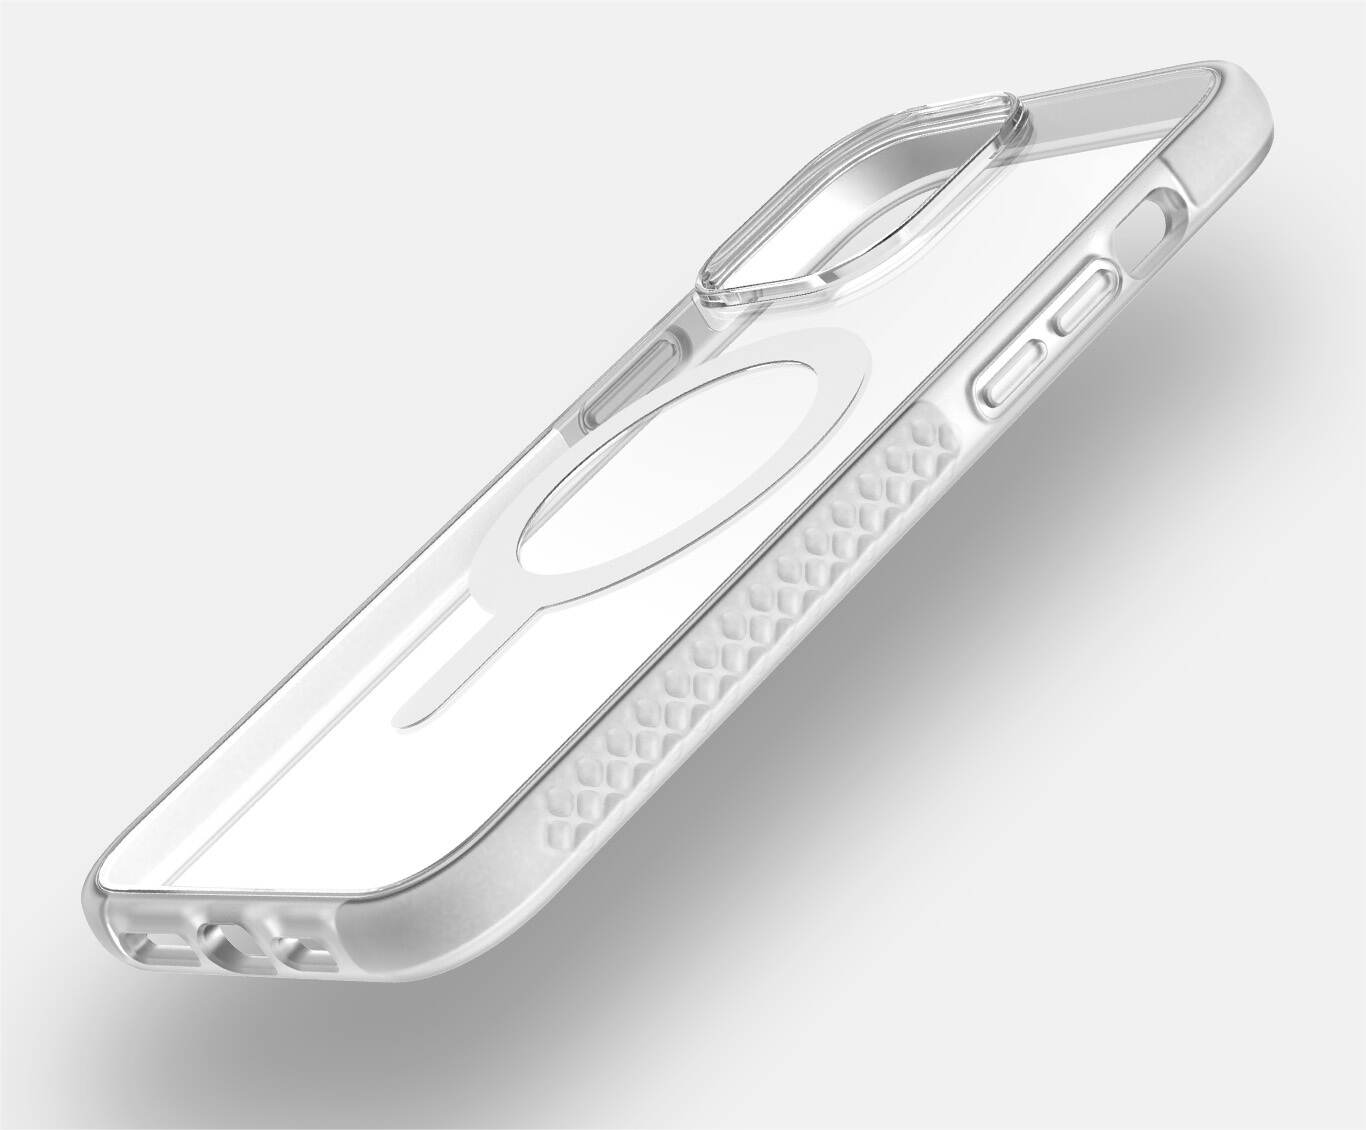 Clear Ace Pro MagSafe case